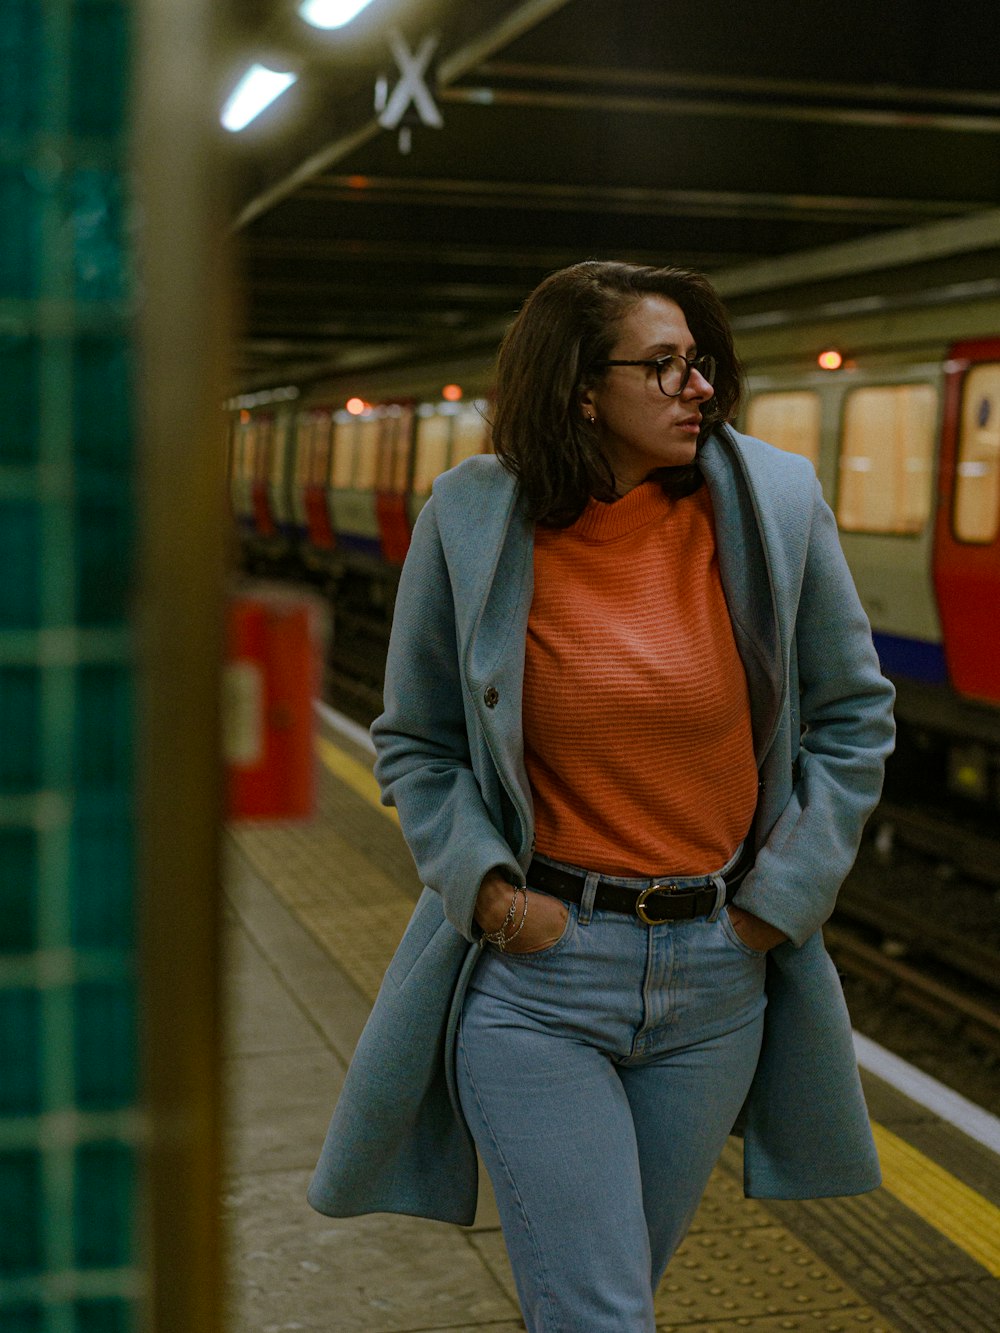 a woman in a blue coat and orange sweater is walking on a subway platform